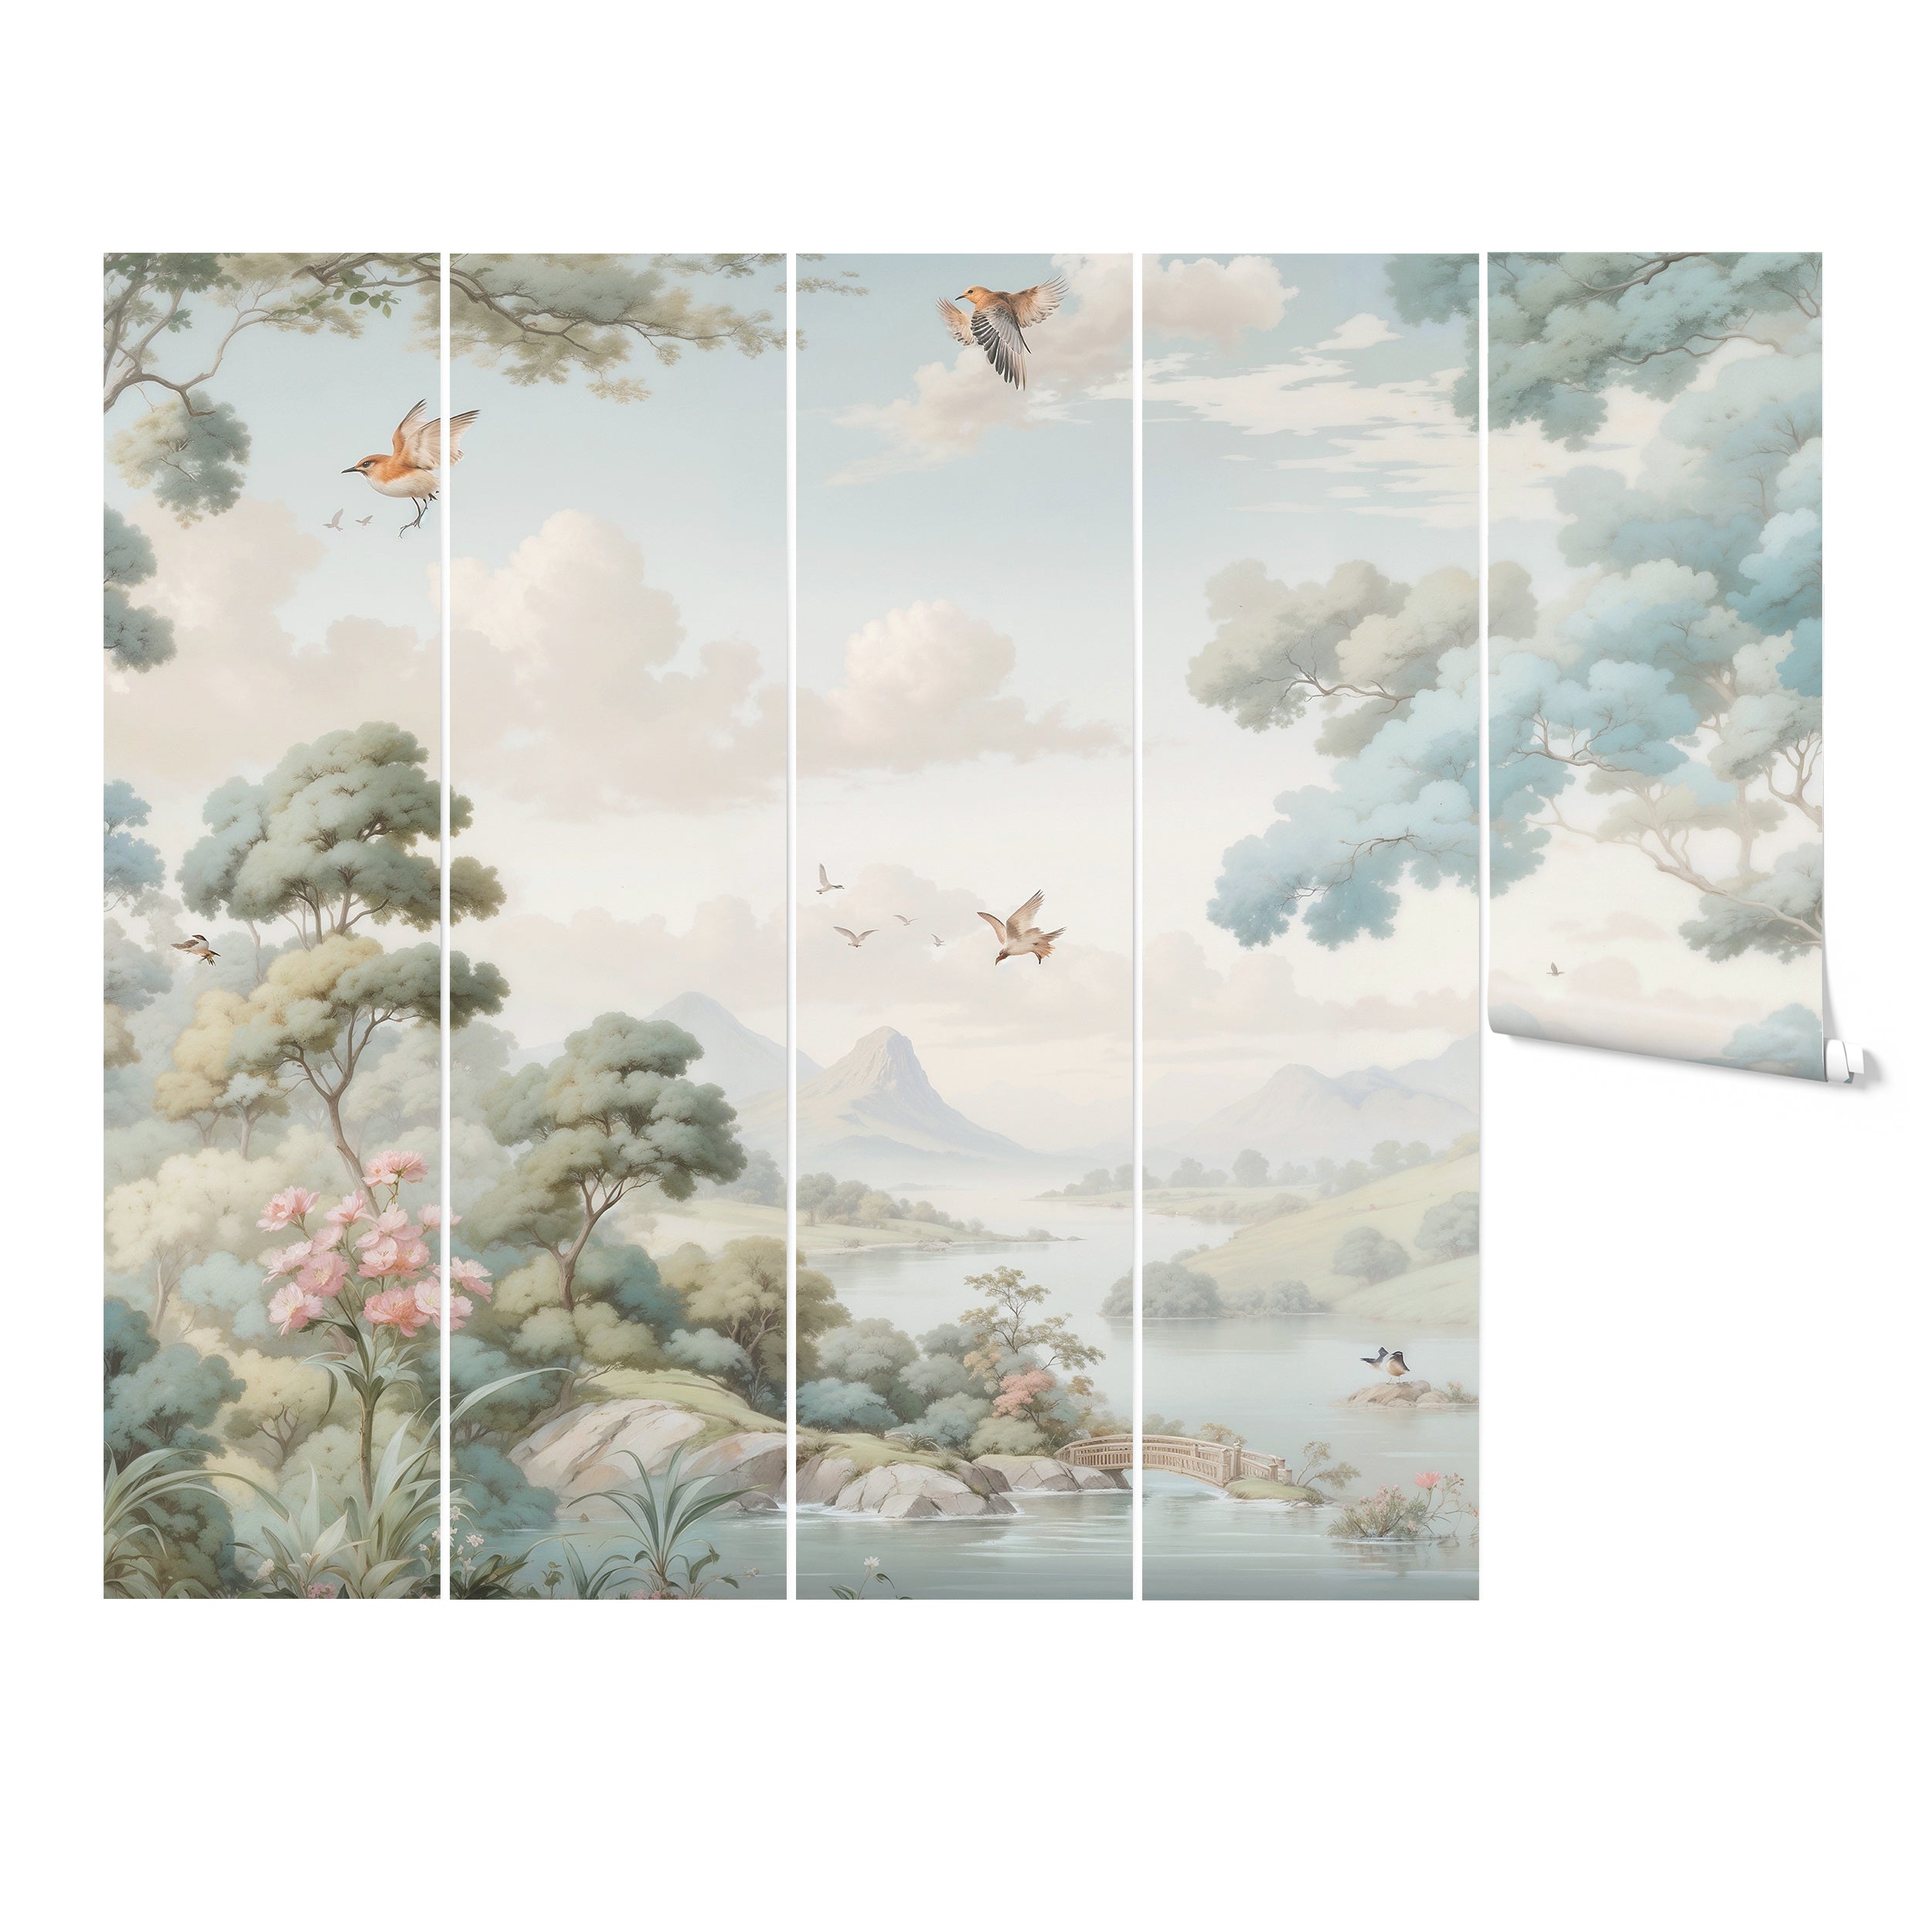 Rolled-up wallpaper showcasing sections of a Loire Valley landscape mural with lush foliage and a calm river scene."